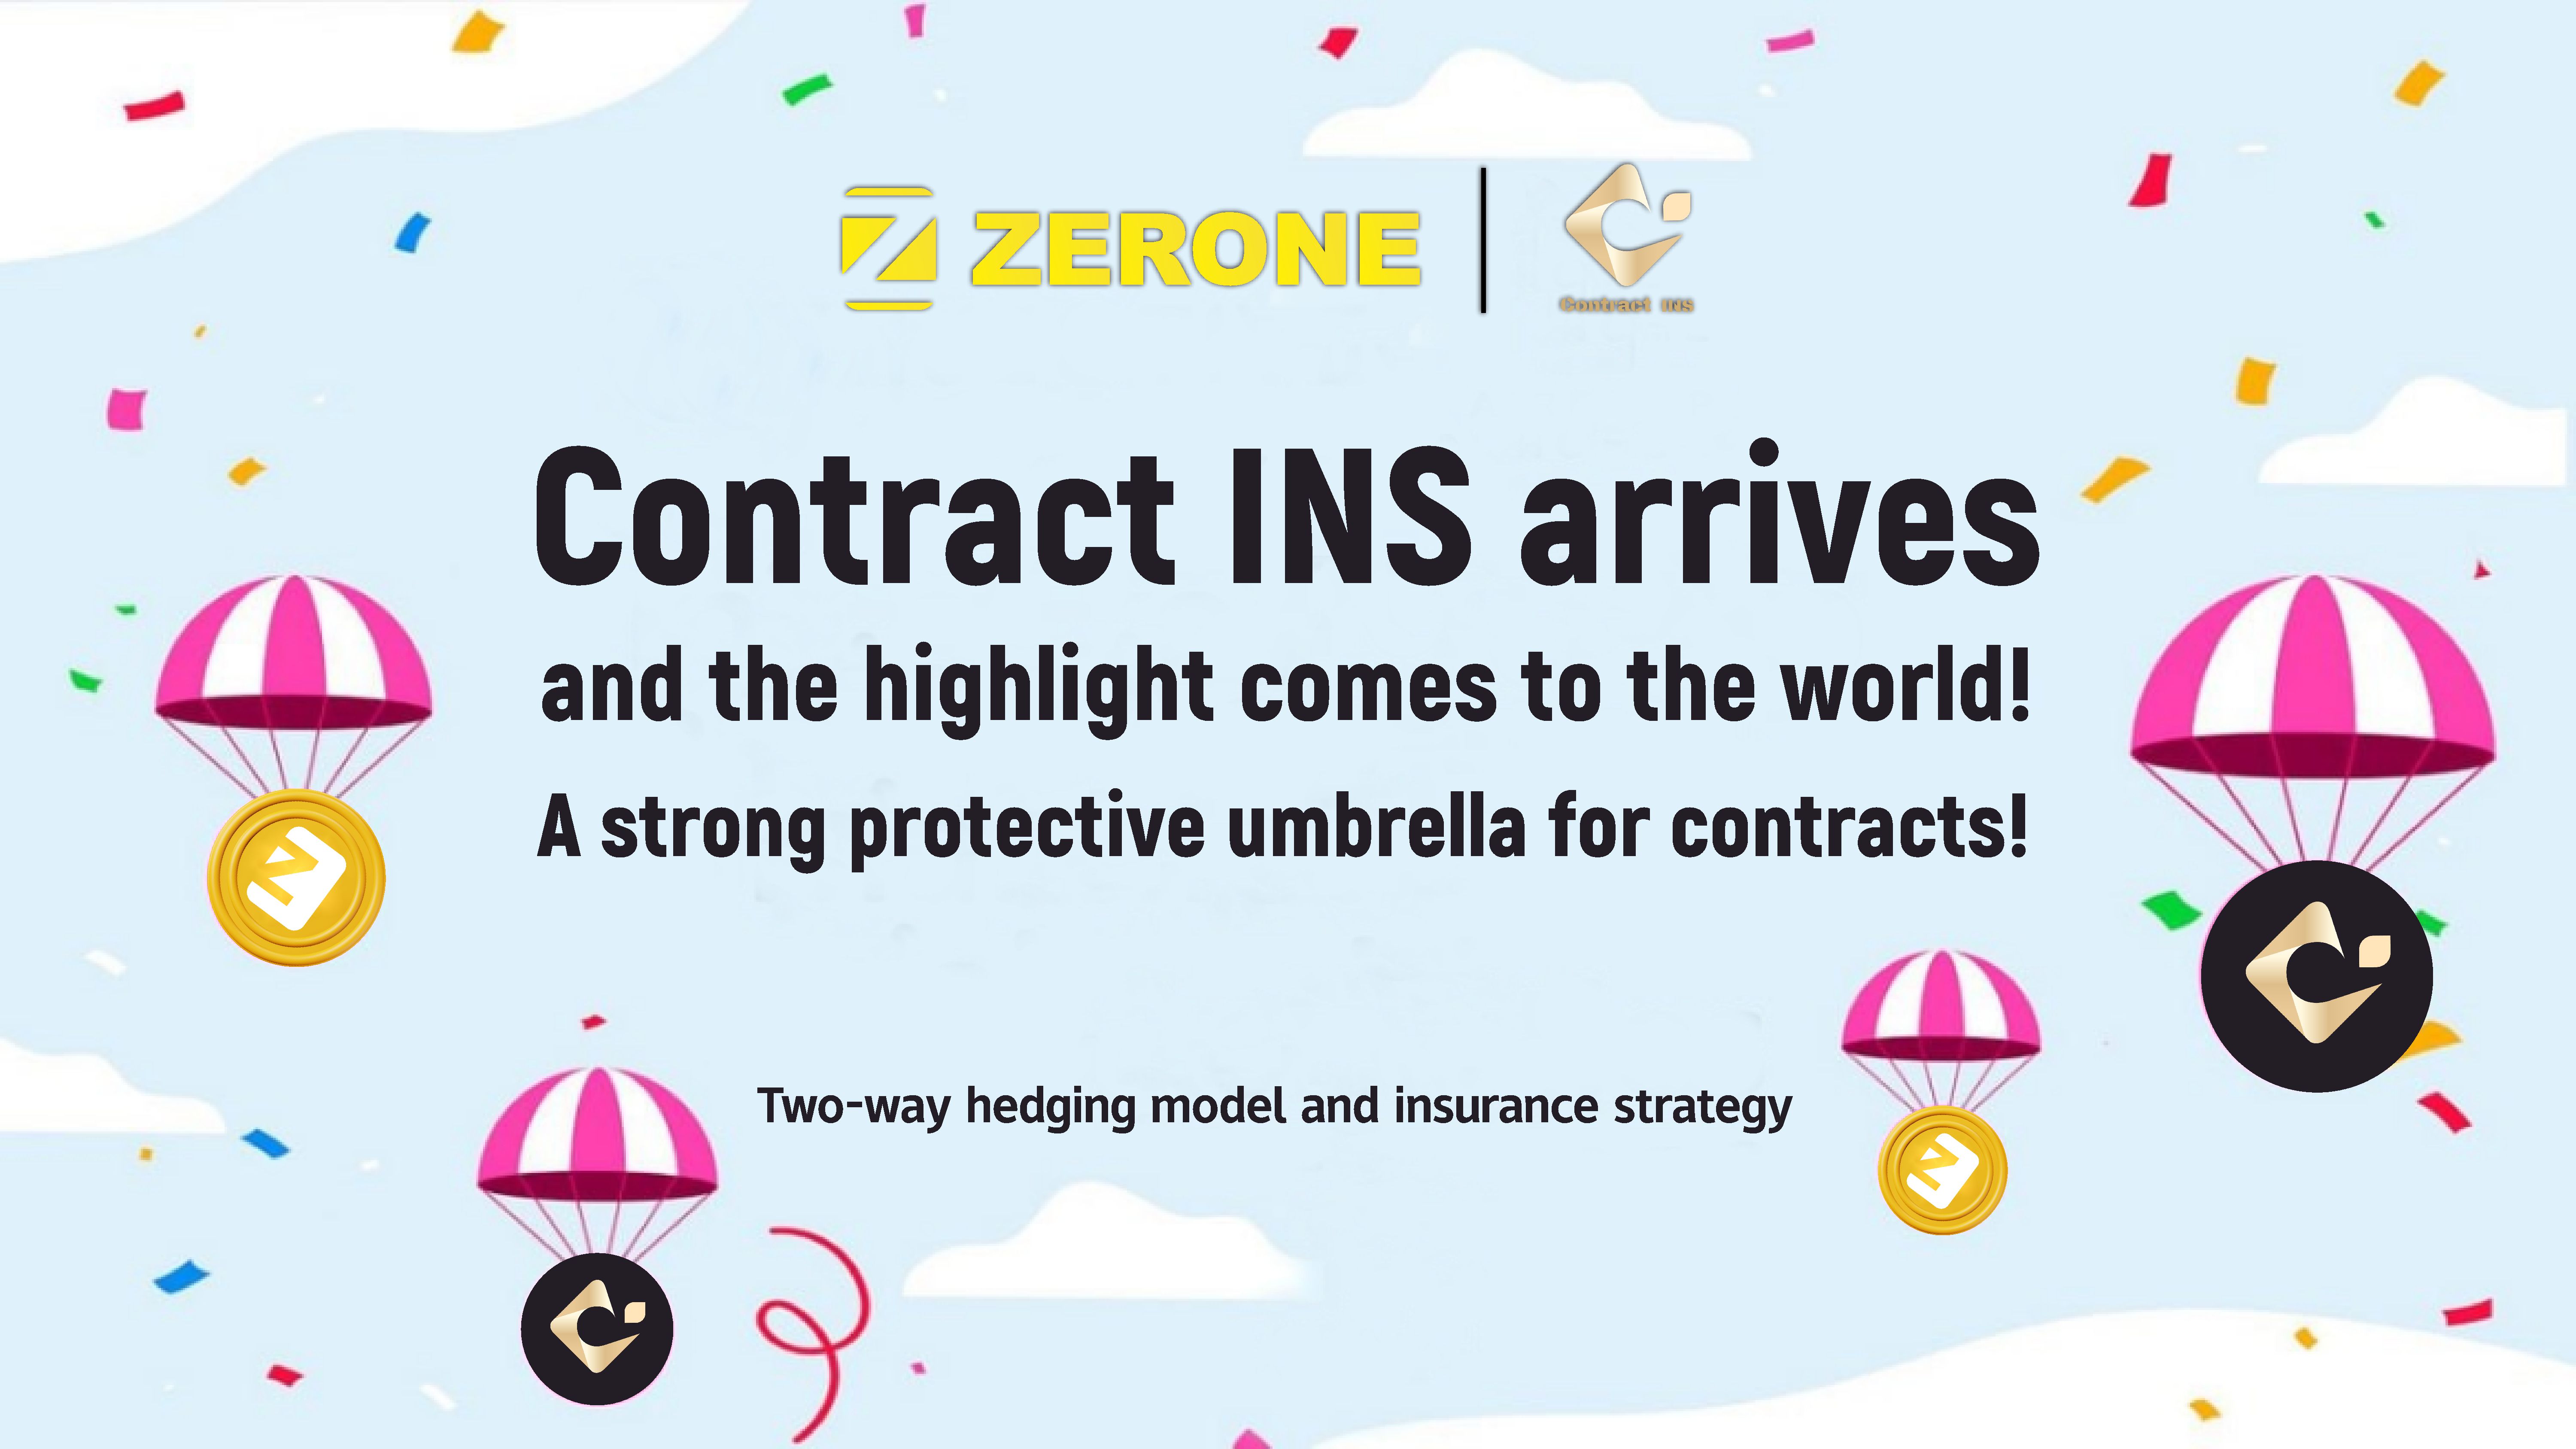 Contract INS begins the second half of its journey, the 